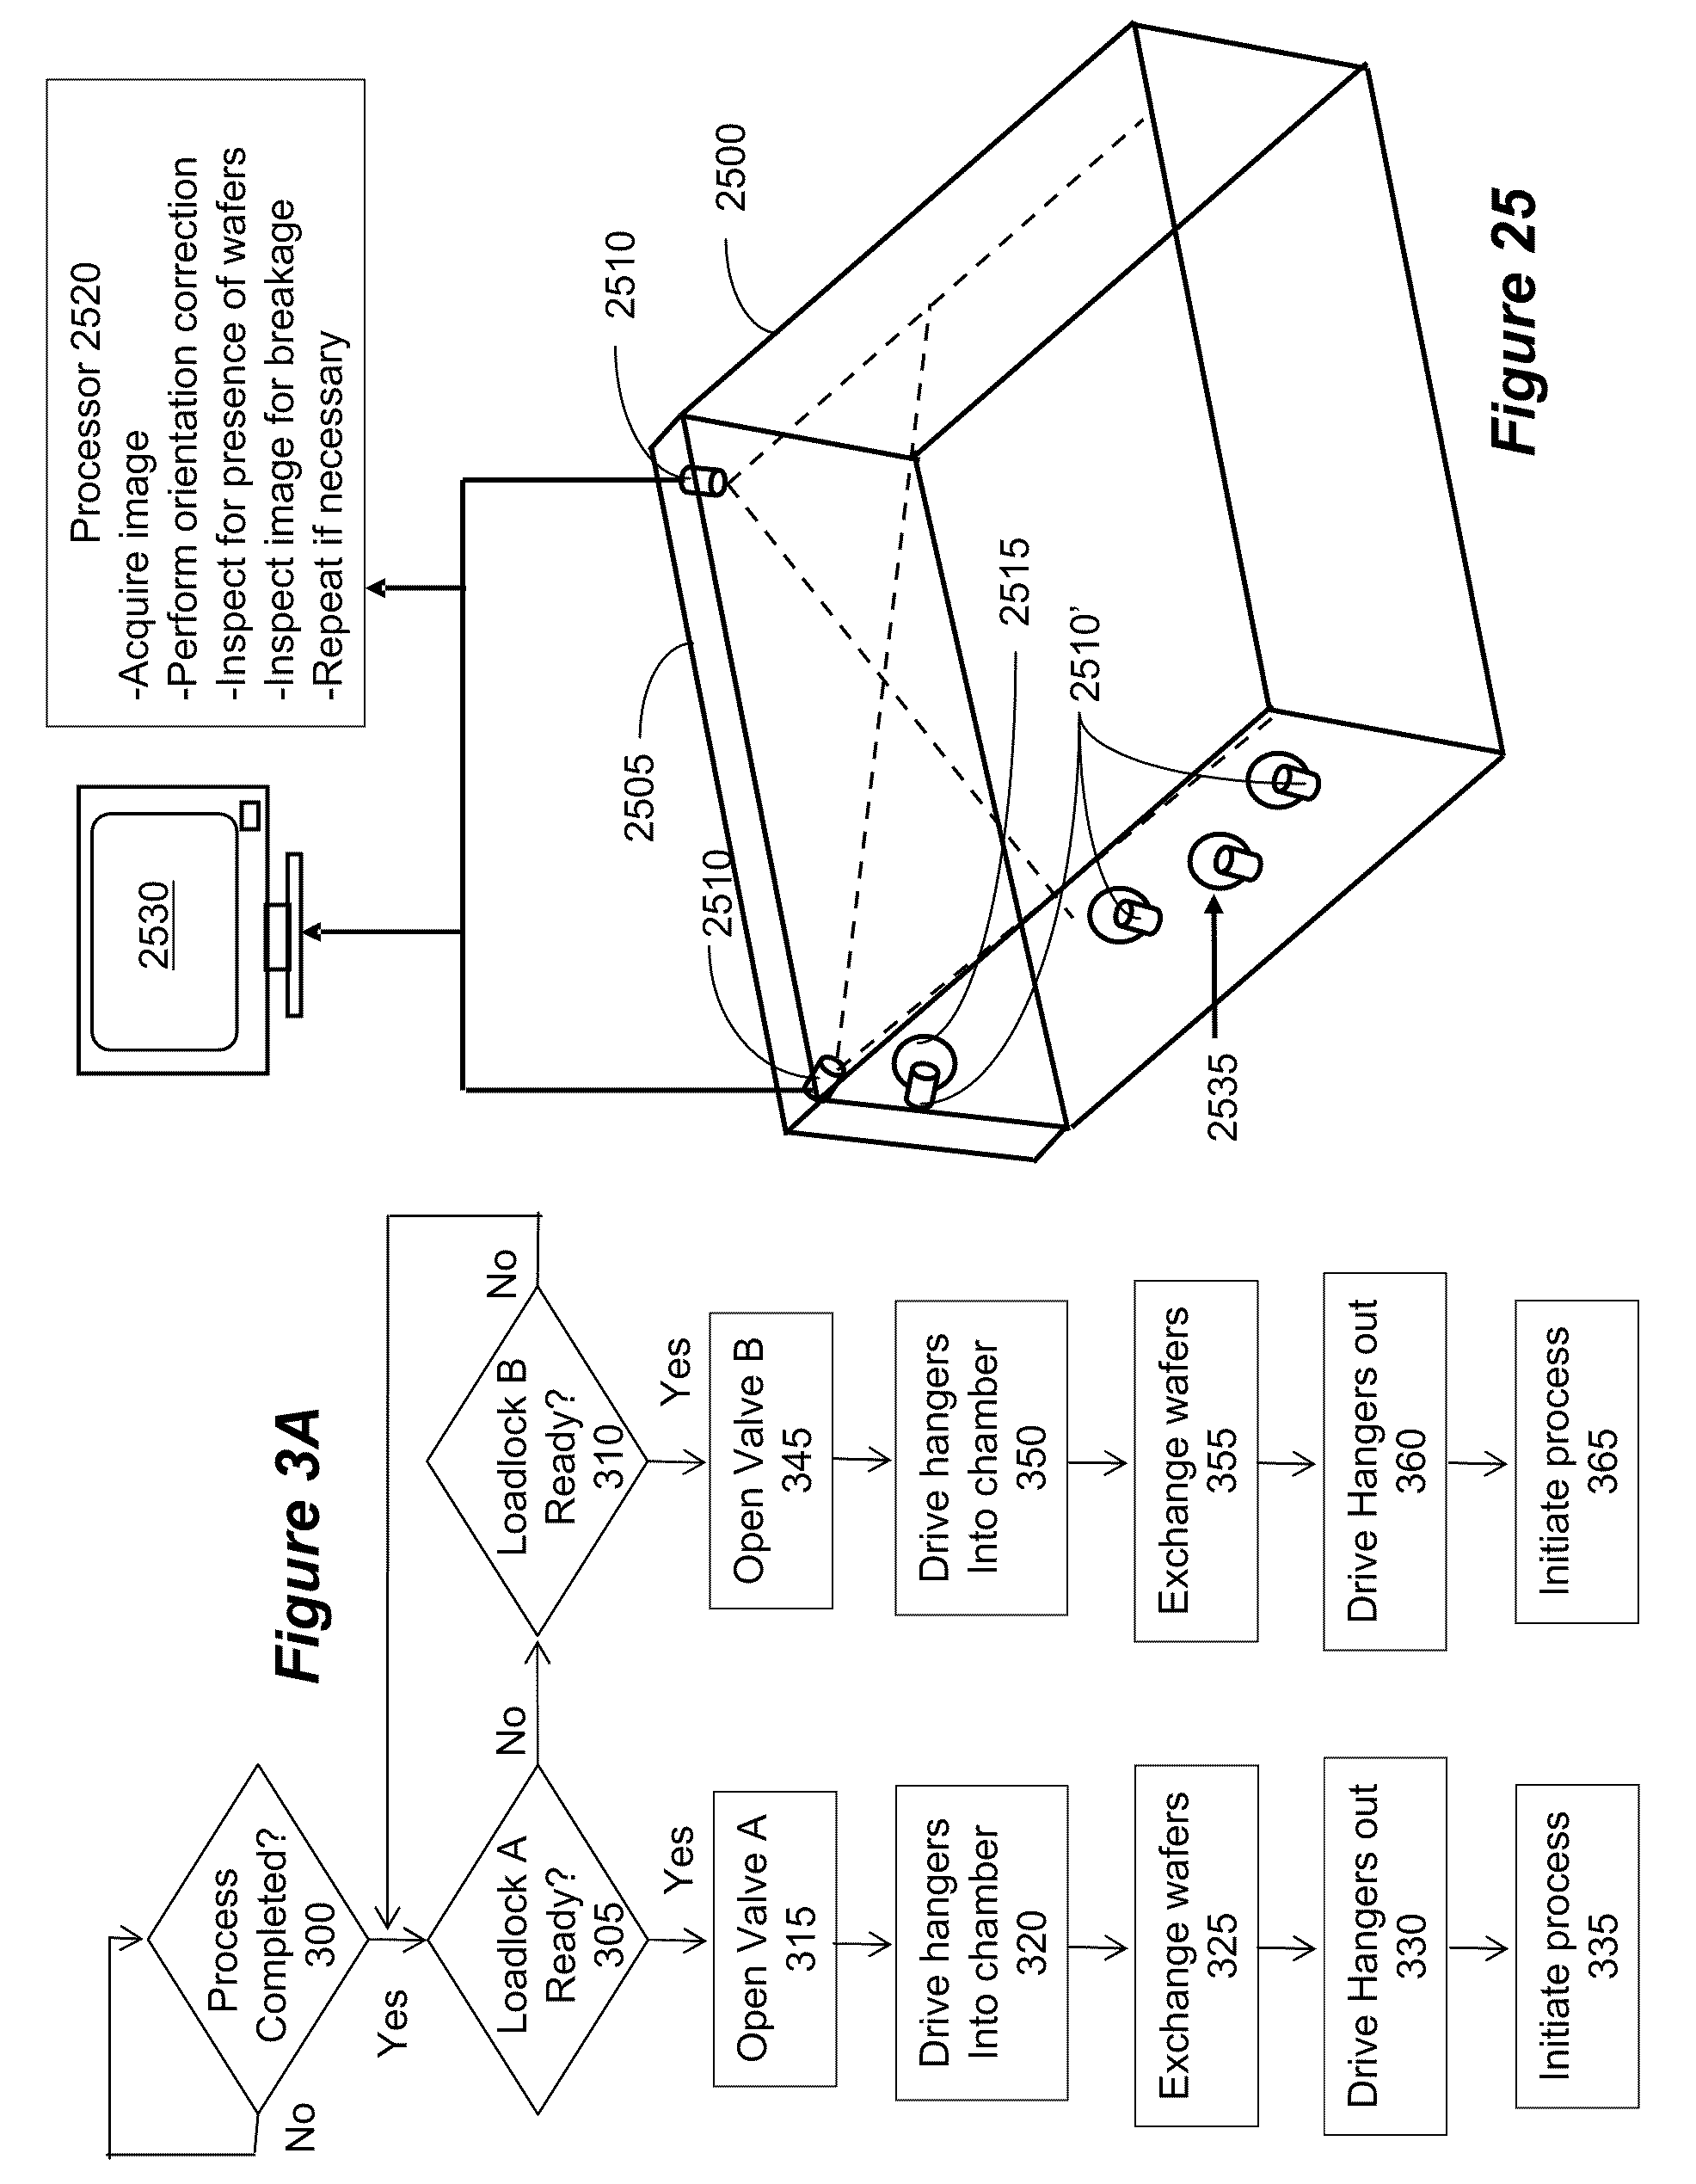 Auto-sequencing multi-directional inline processing apparatus